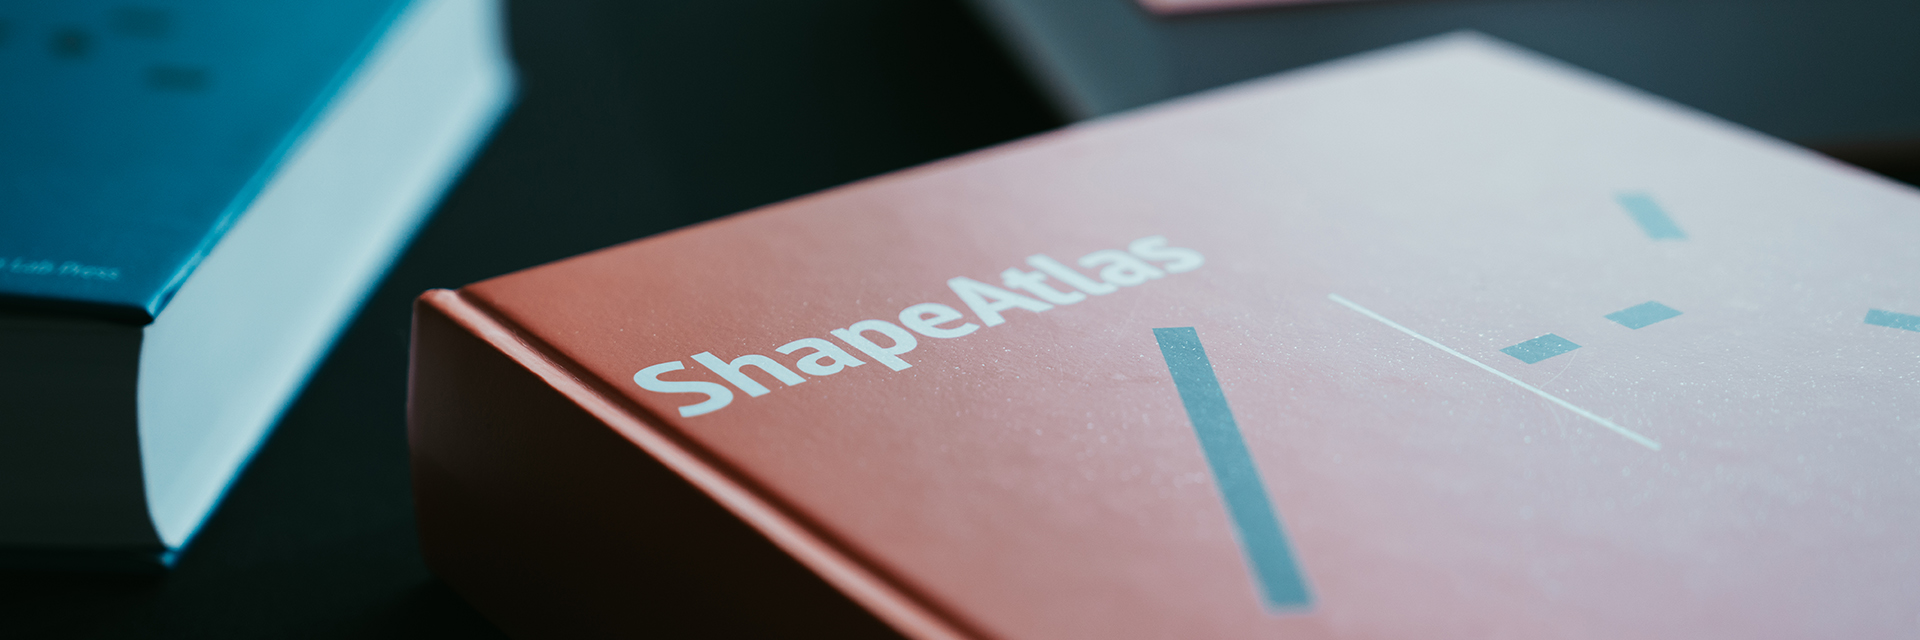 A copy of the Shape Atlas book shared at the 2019 Shape Machine Symposium